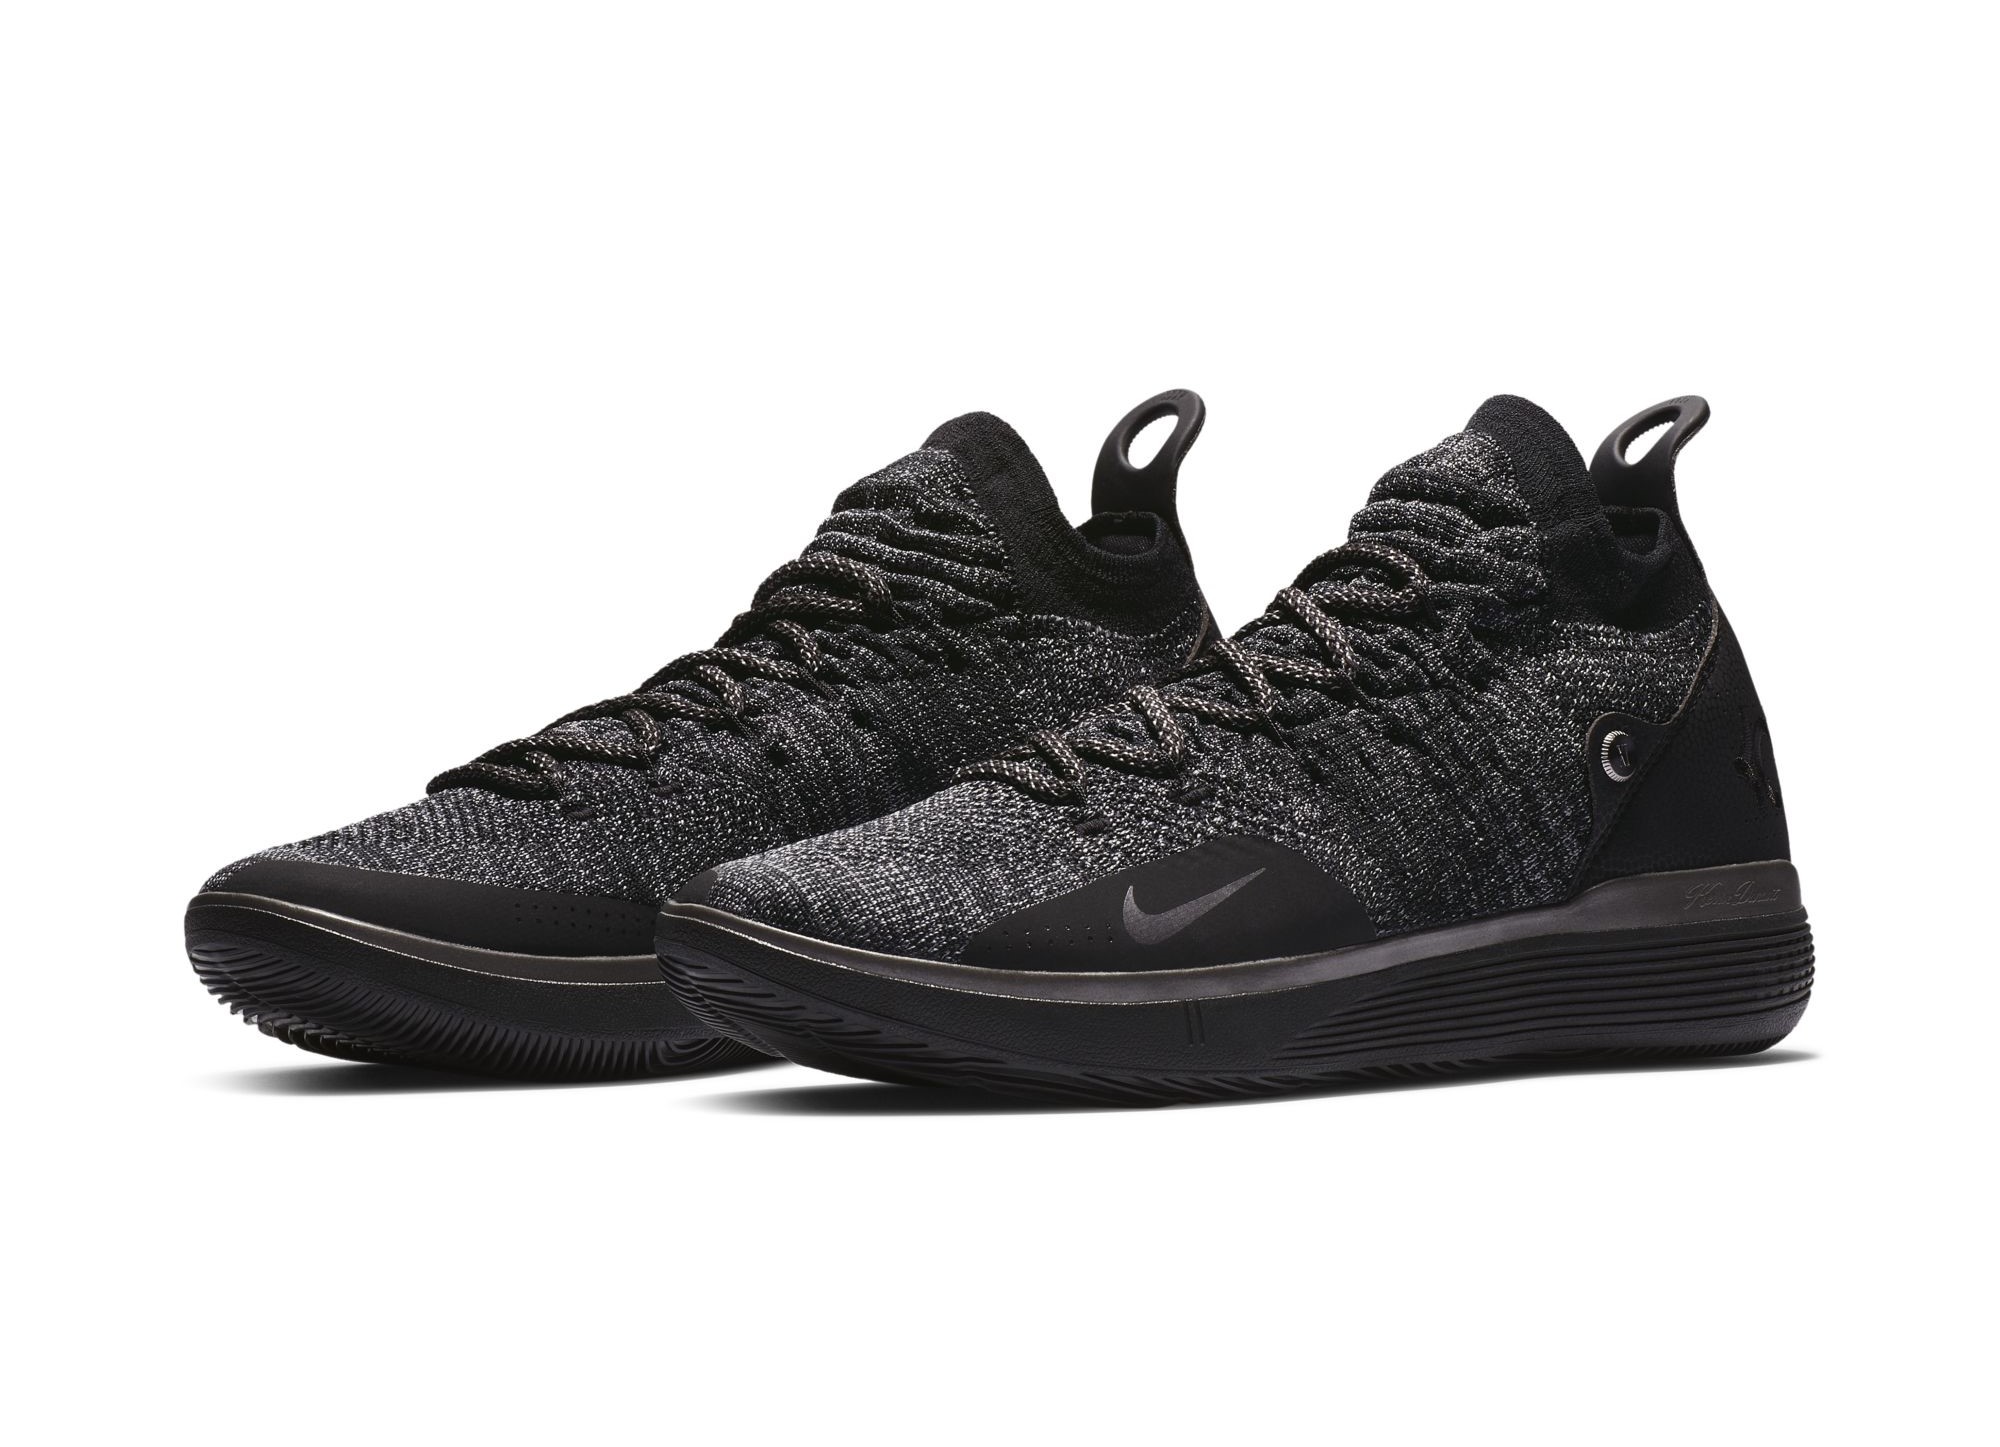 Kd 11 Gray And Black Online Deals, UP 